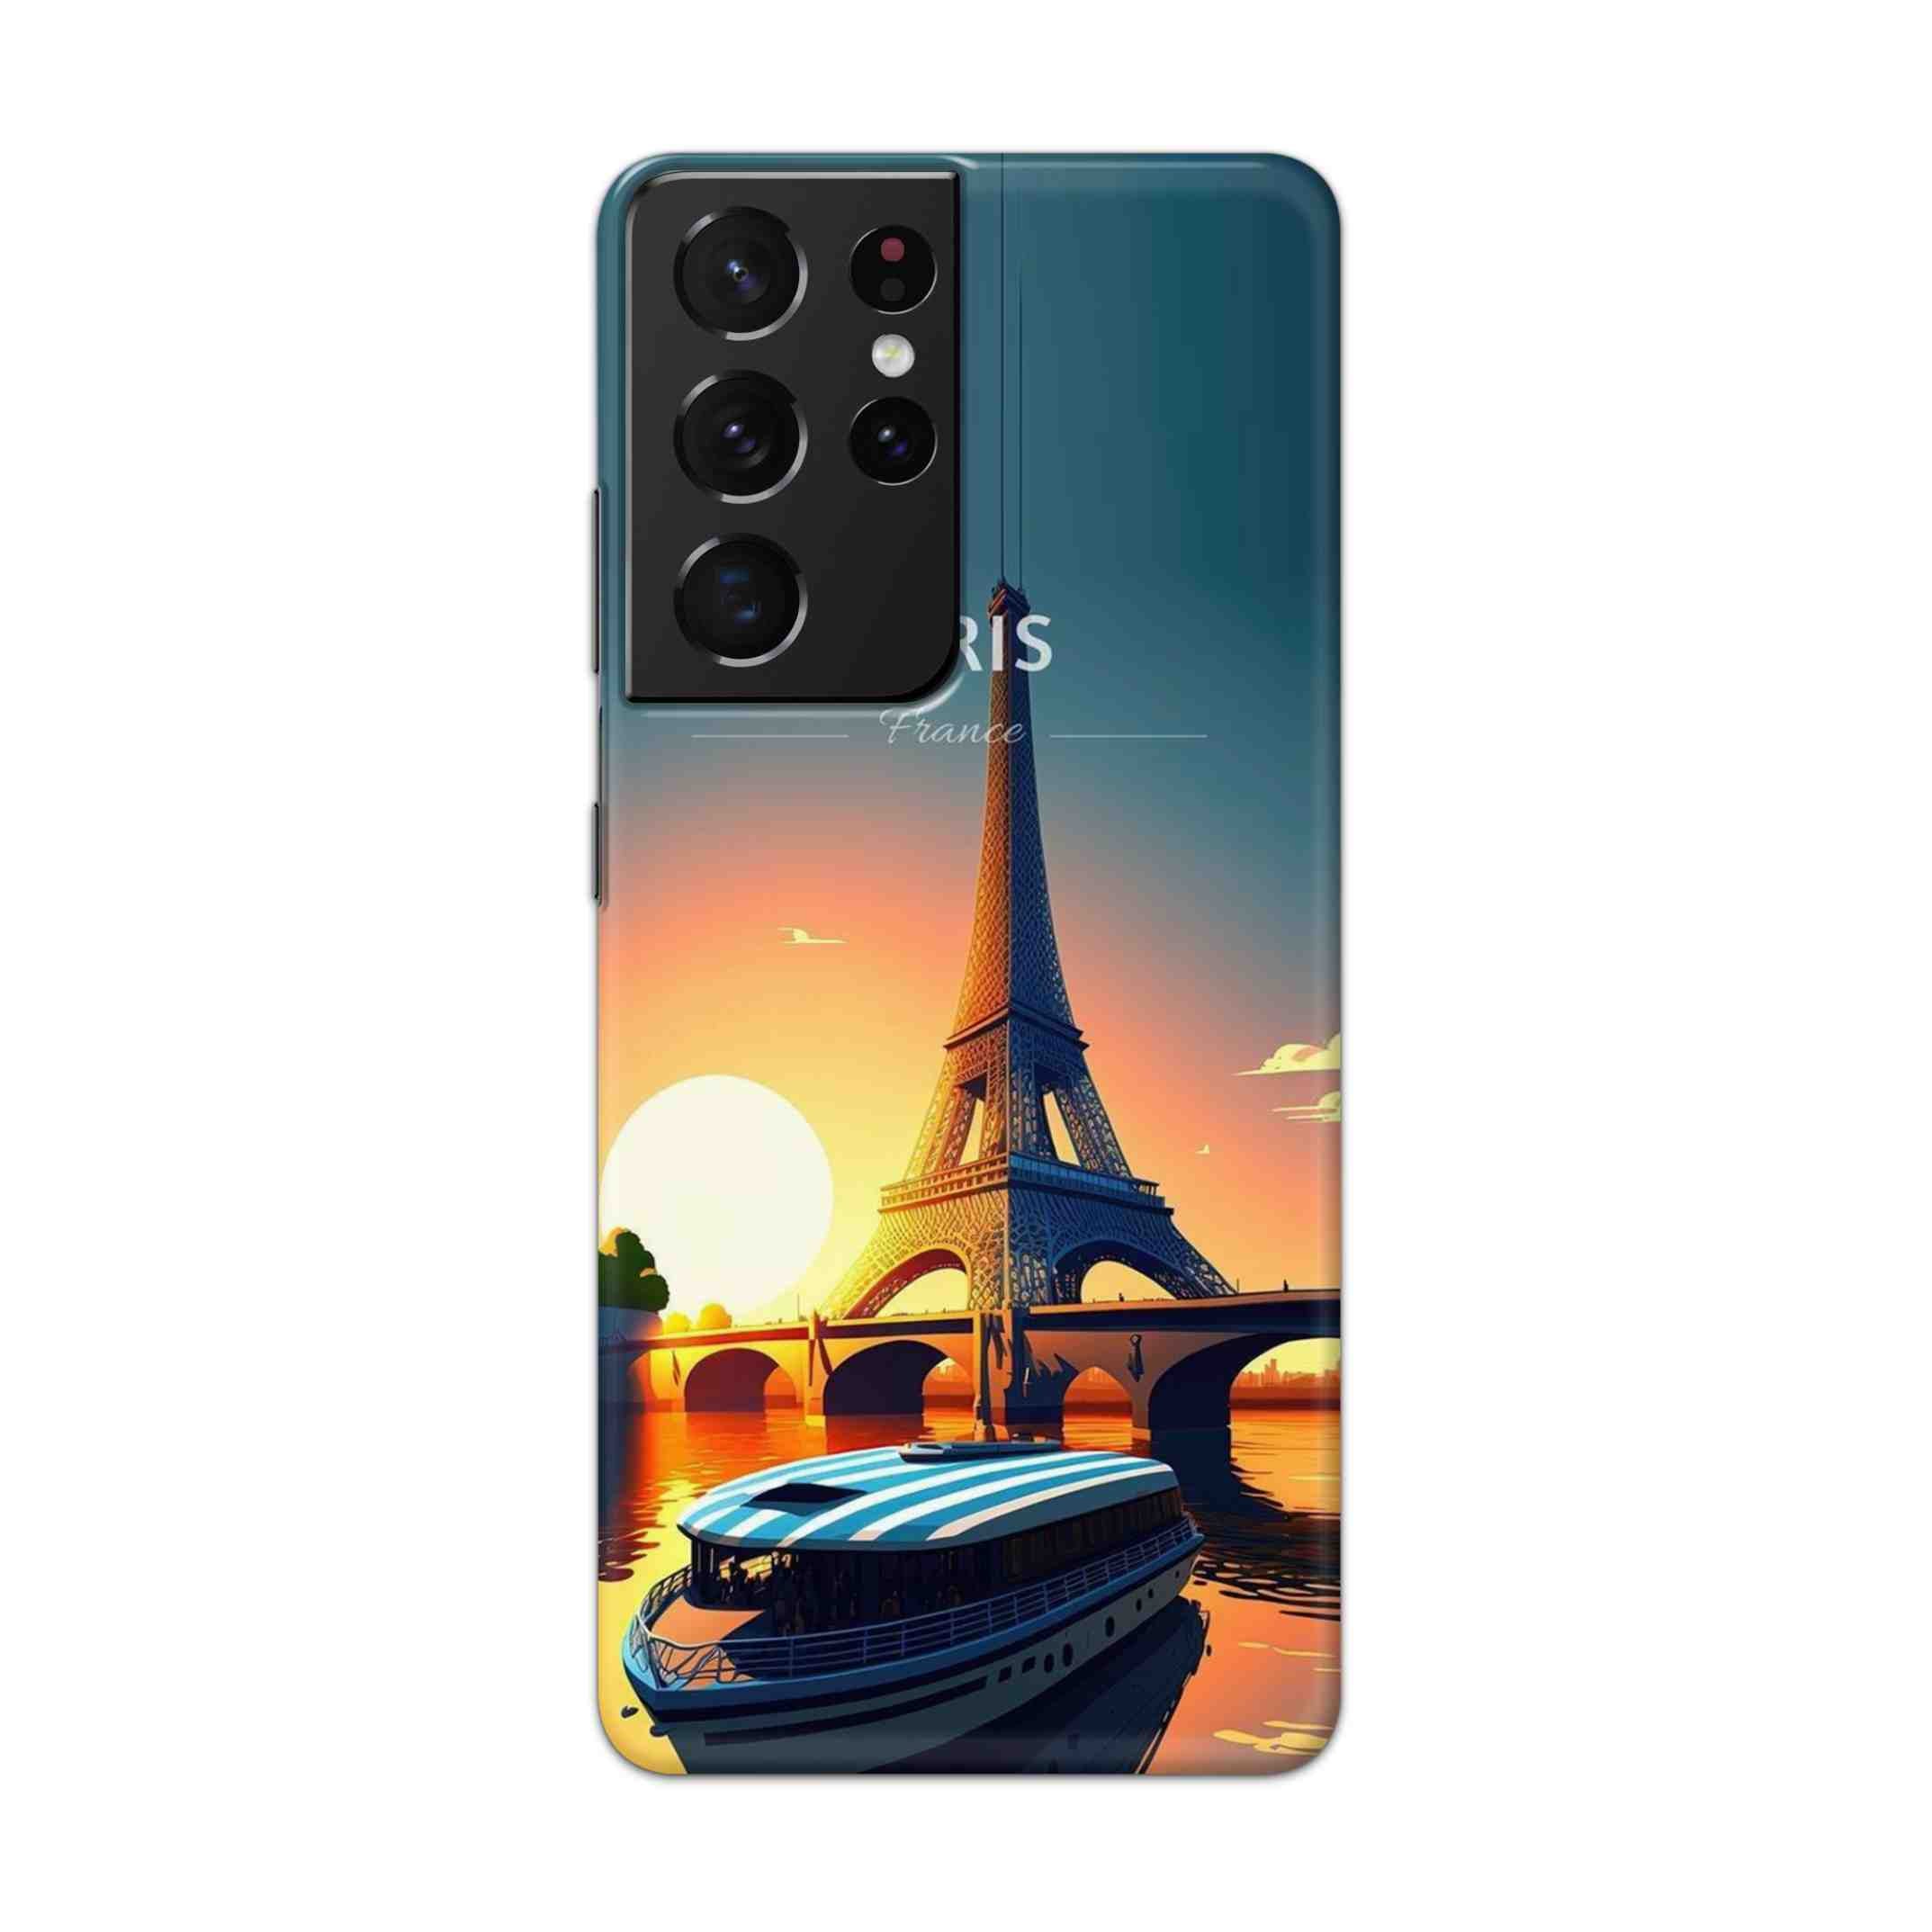 Buy France Hard Back Mobile Phone Case Cover For Samsung Galaxy S21 Ultra Online